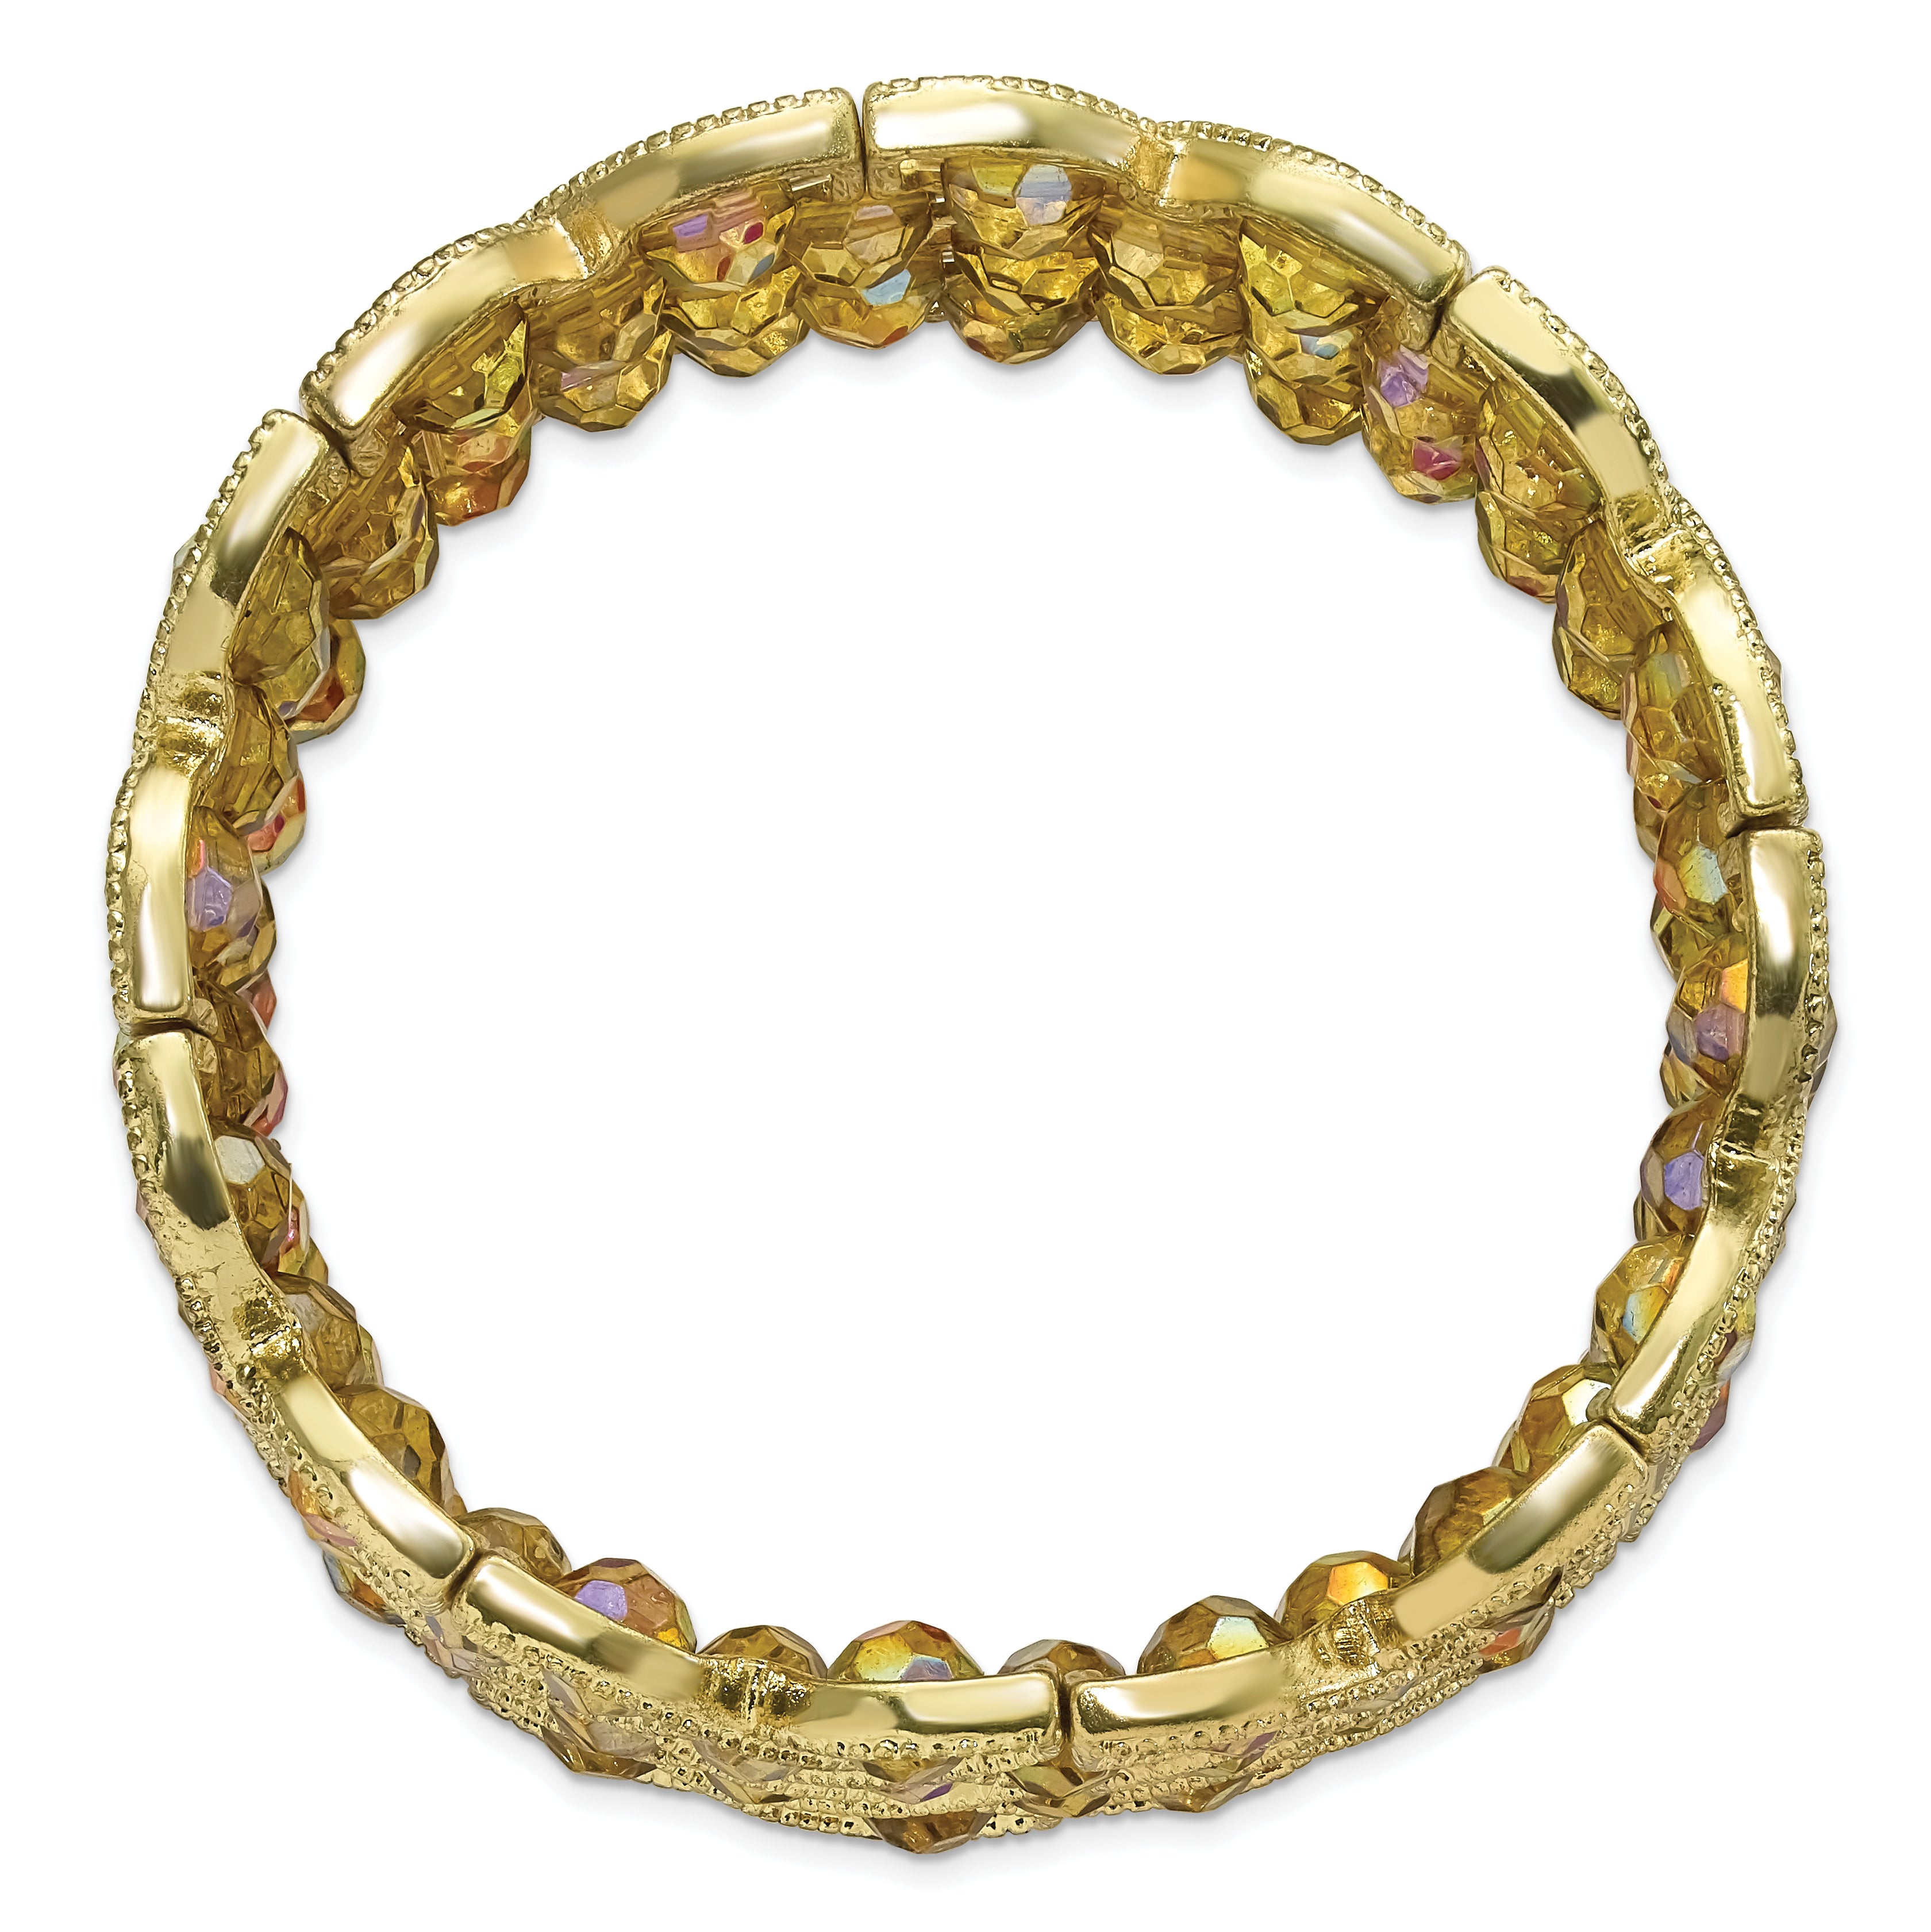 1928 Jewelry Brass-tone Wide Frame Olive Faceted Acrylic Beads Stretch Bracelet